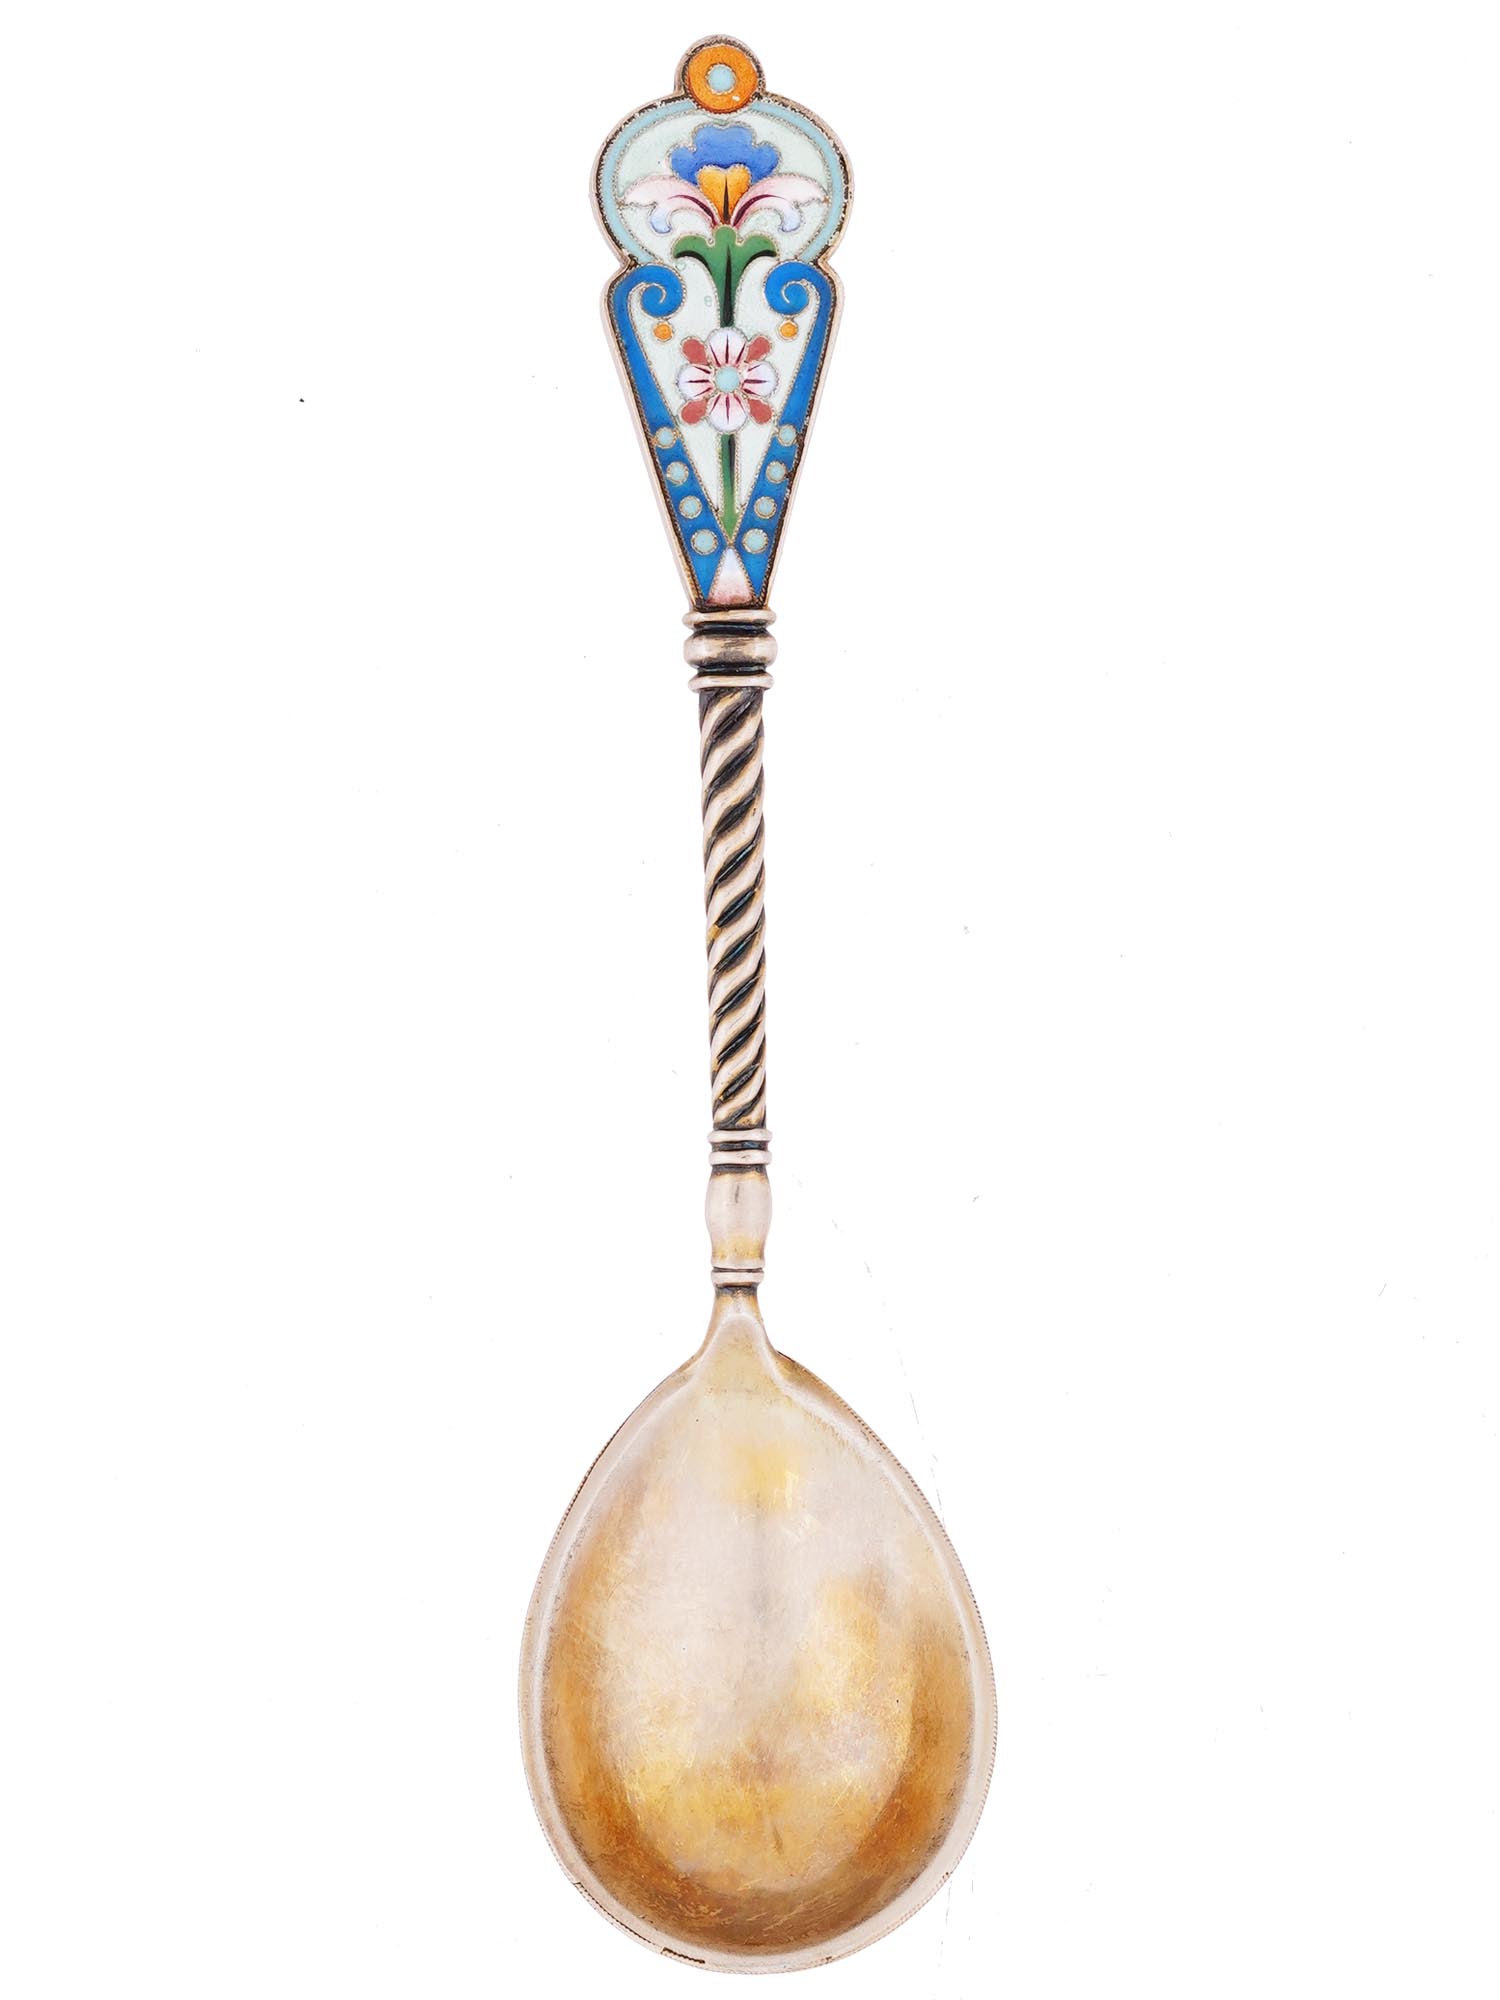 RUSSIAN SILVER ENAMEL SPOON WITH TWISTED STEM PIC-1